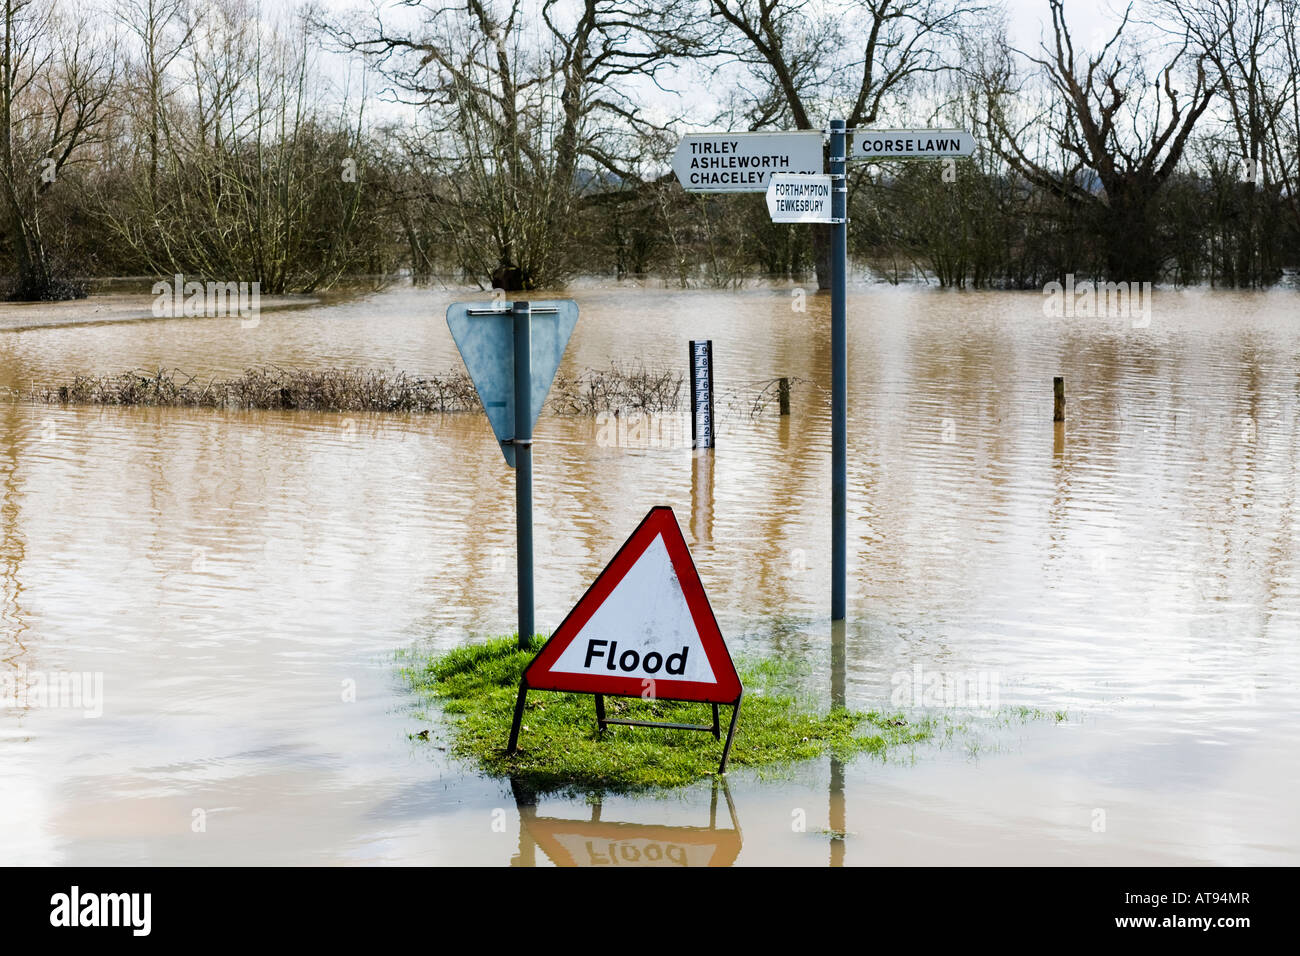 Flood warning road sign in a lane flooded by the River Severn at Chaceley, near Tewkesbury, Gloucestershire Stock Photo